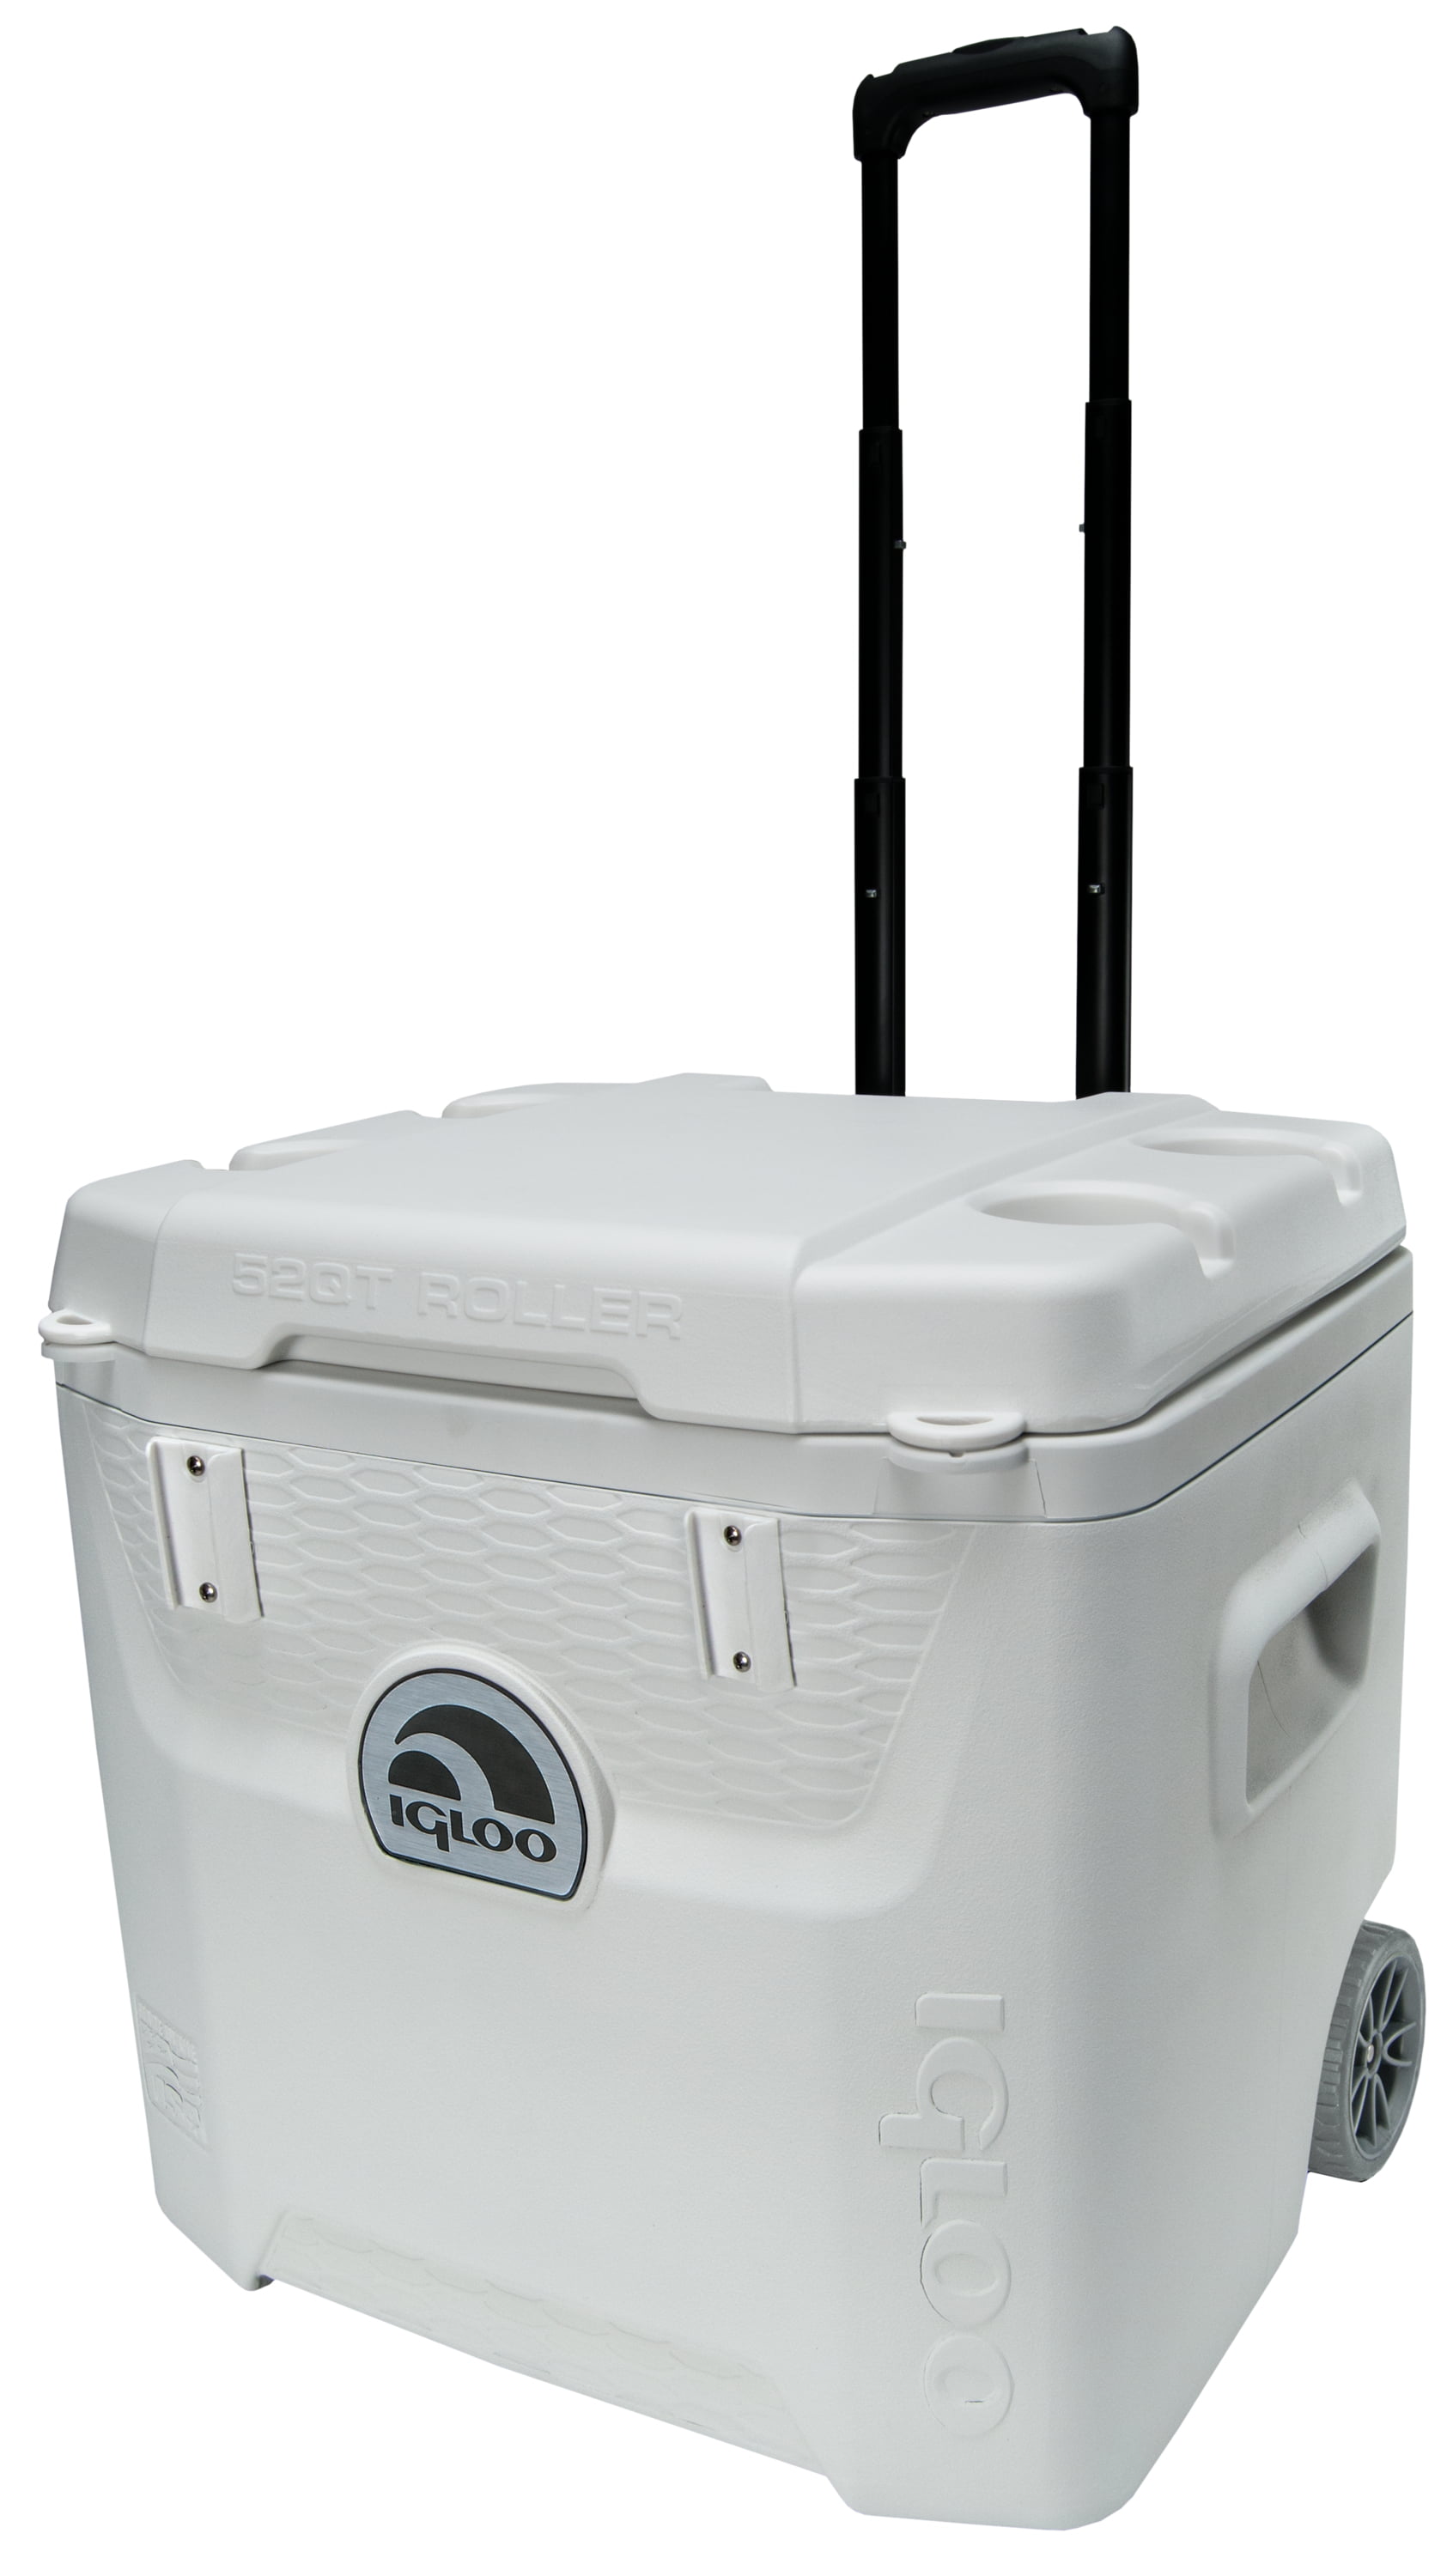 52-Qt Igloo 5-Day Marine Ice Chest Cooler with Wheels (White) $68 + Free Shipping